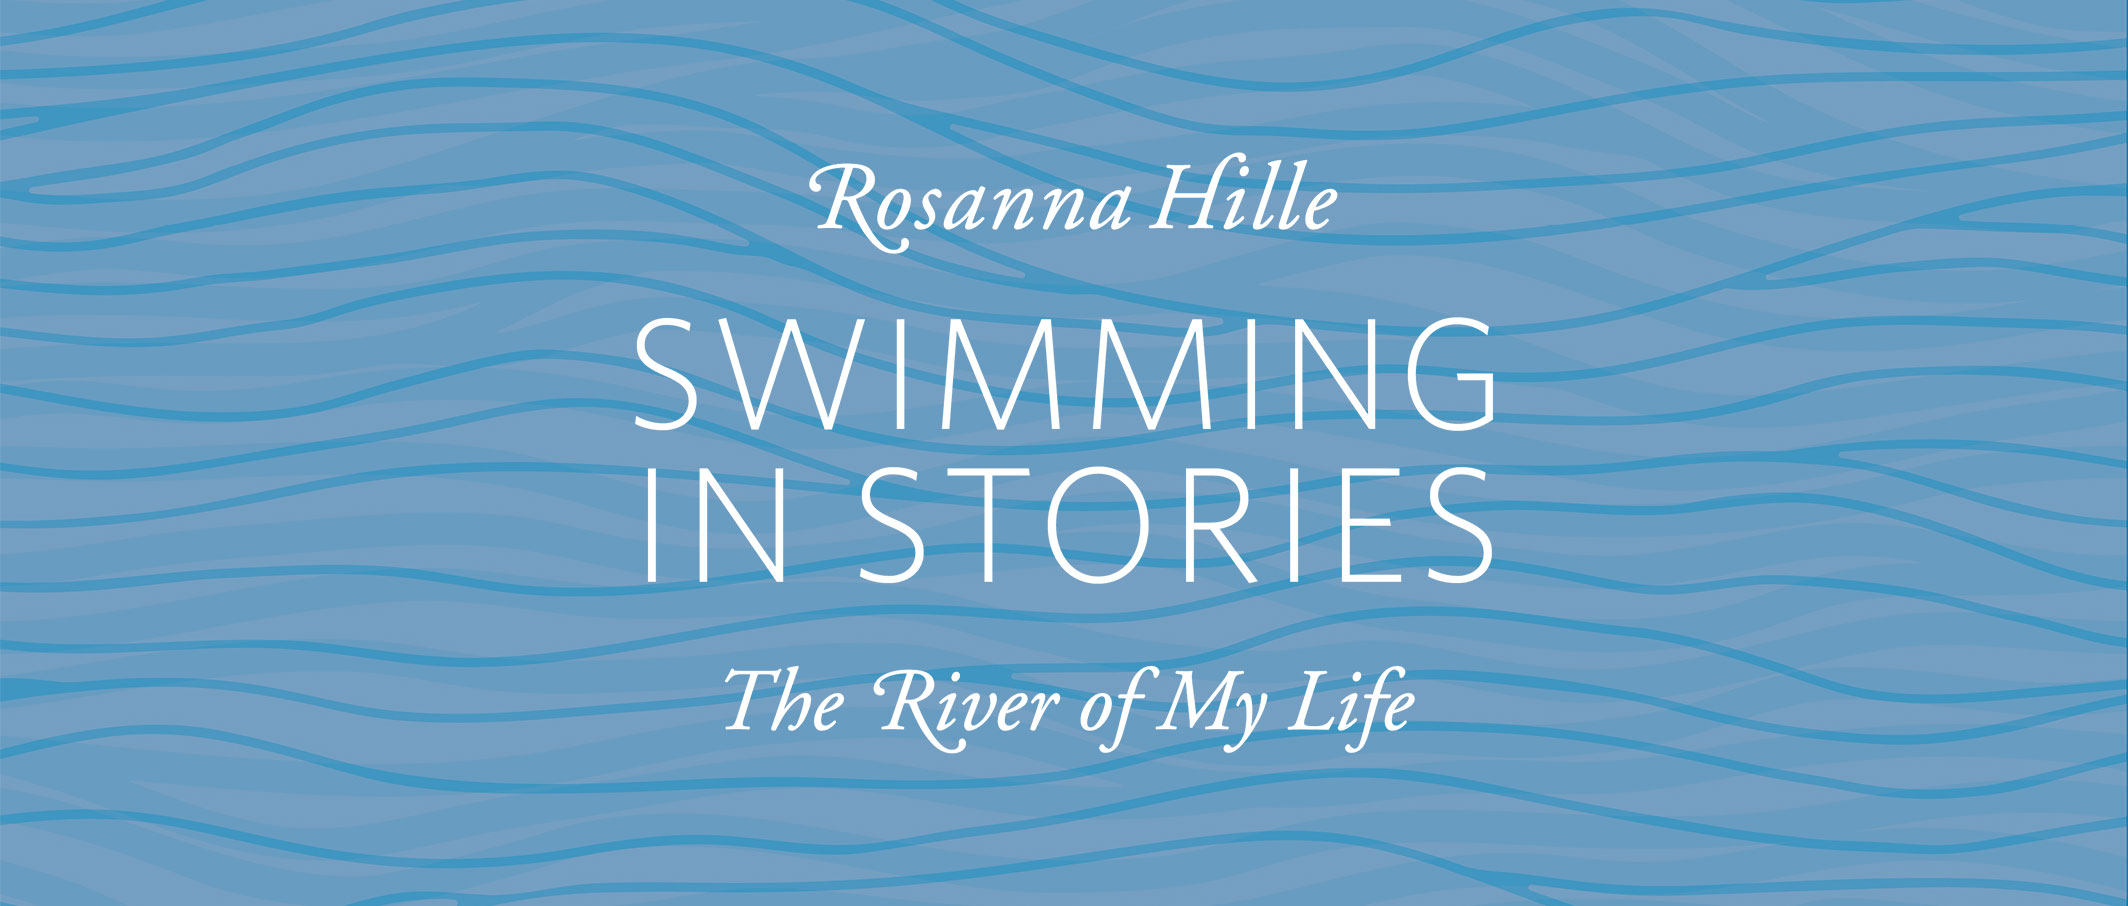 Swimming In Stories - A memoir by Rosanna Hille